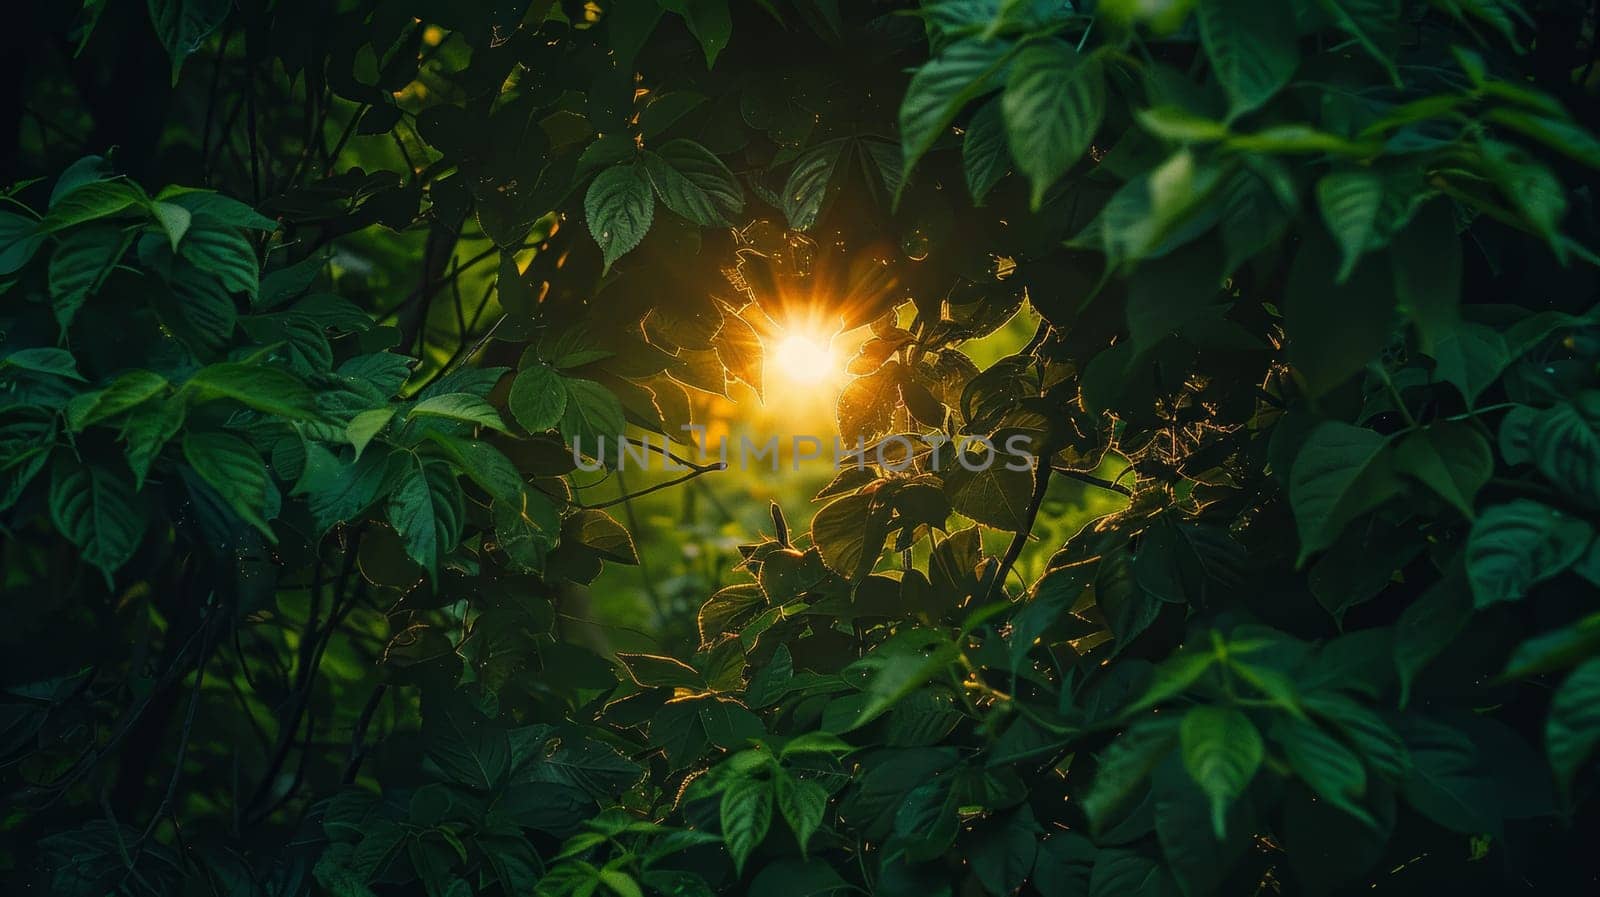 Bright Sun Shining Through Green Leaves and Branches in Forest